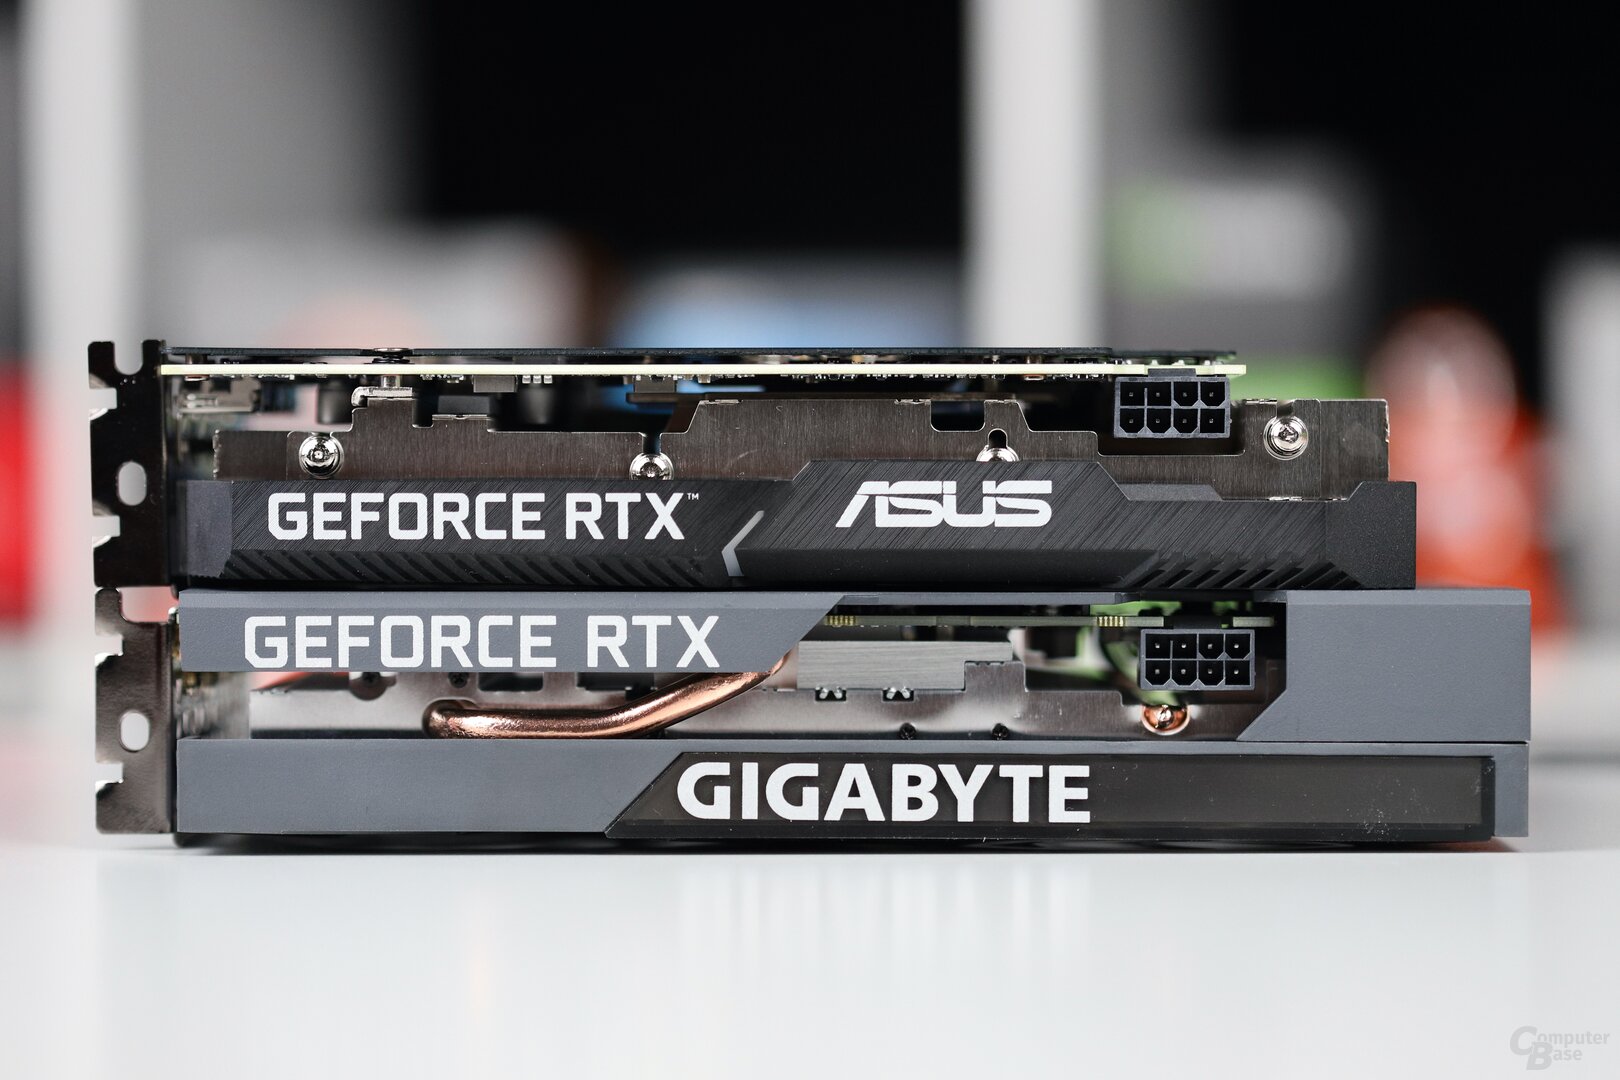 GeForce RTX 3050 from Asus and Gigabyte in the test